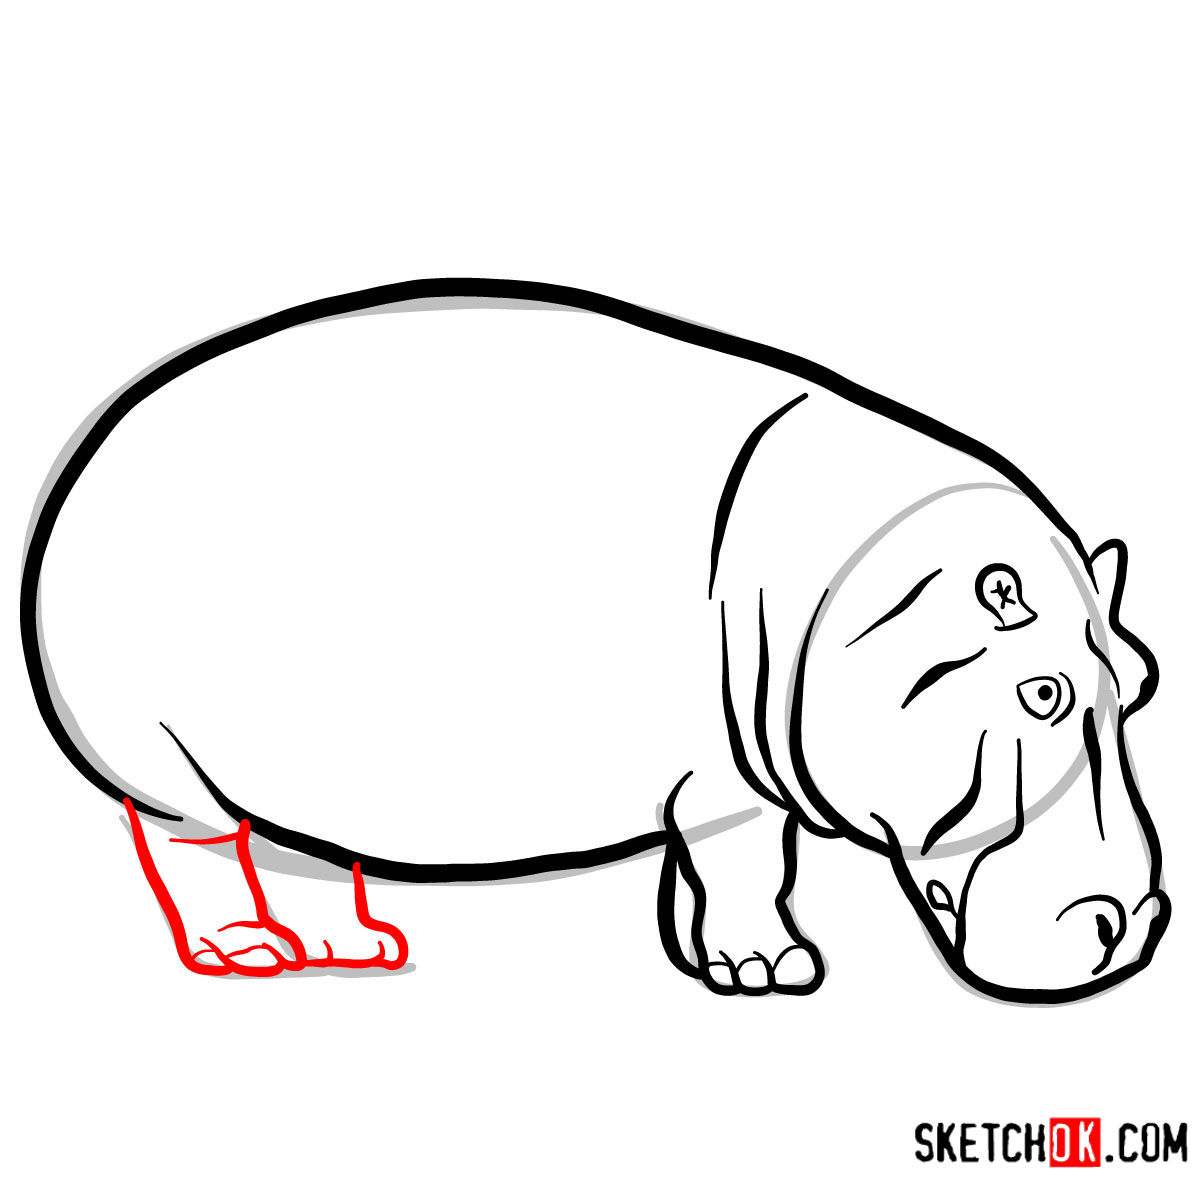 How to draw a Hippopotamus | Wild Animals - Sketchok easy drawing guides